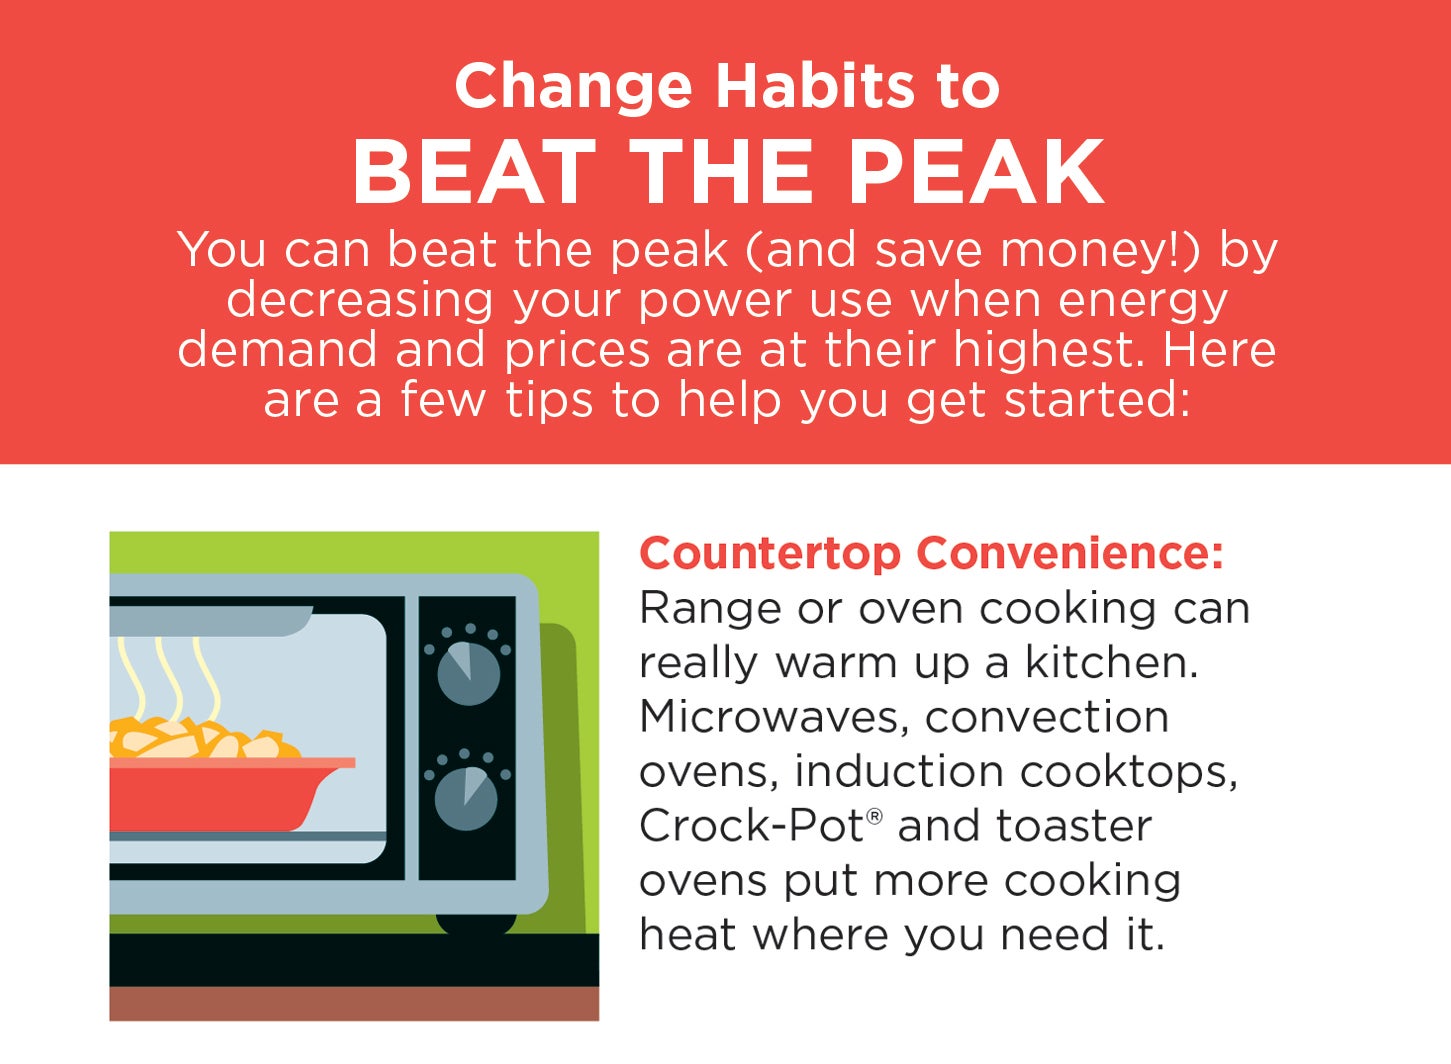 Choose meals that don't contribute heat to your home